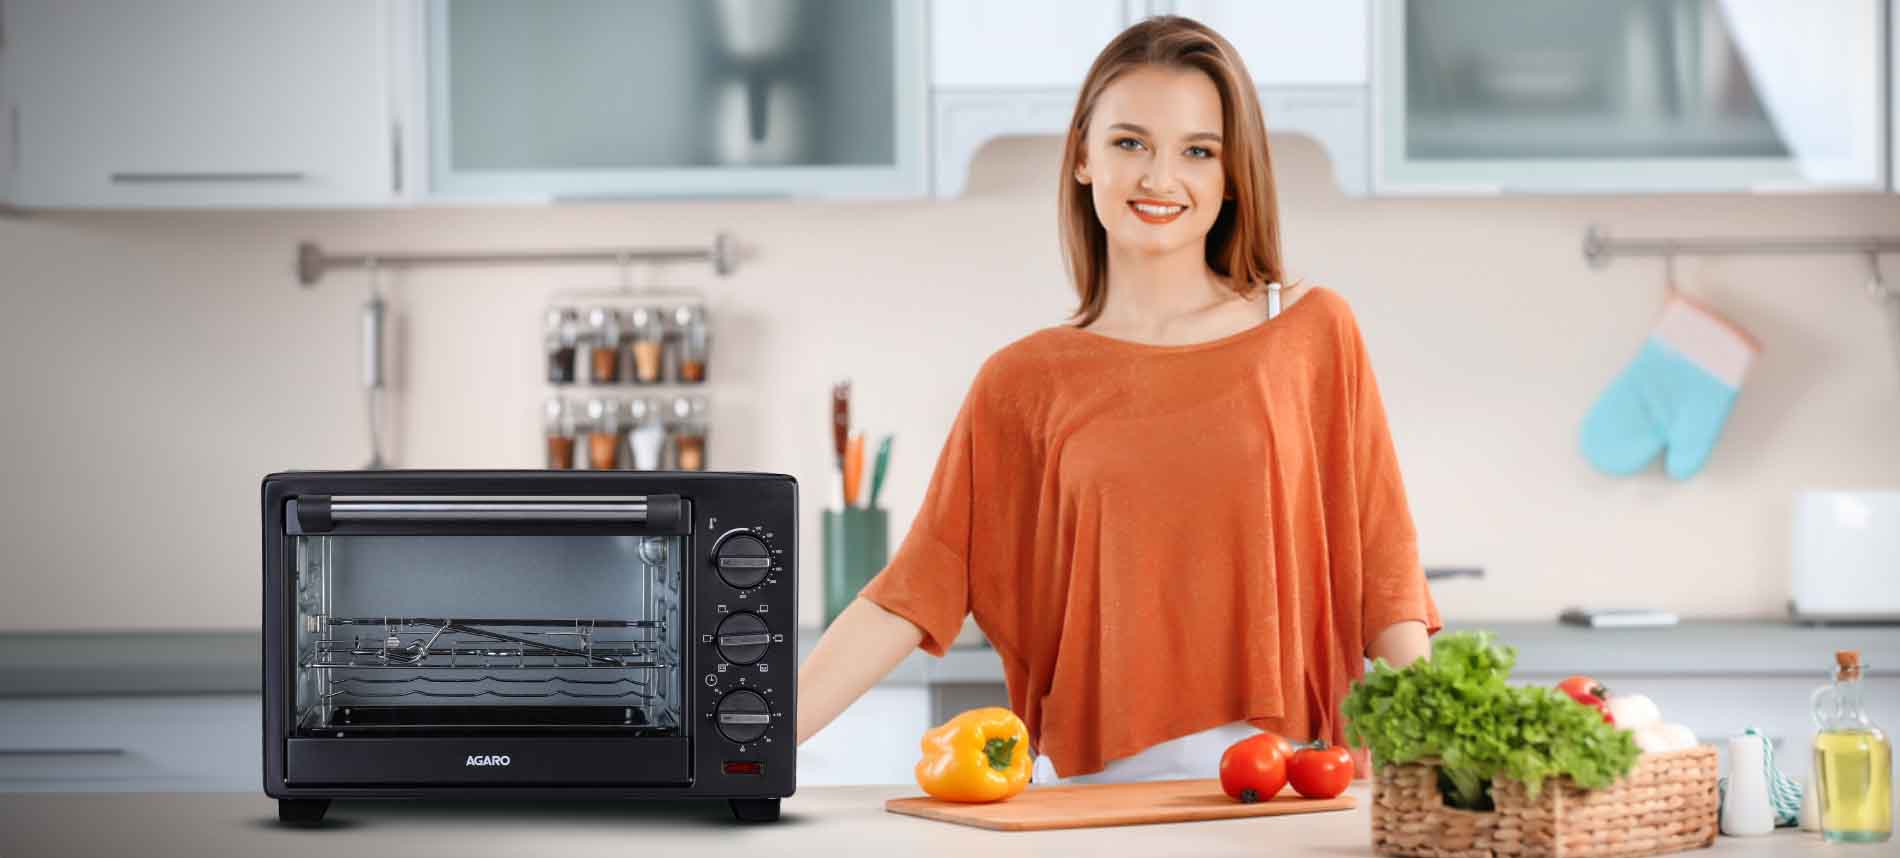 Top 5 Compact OTGs: Mini Oven for Baking Enthusiasts In India – Agaro